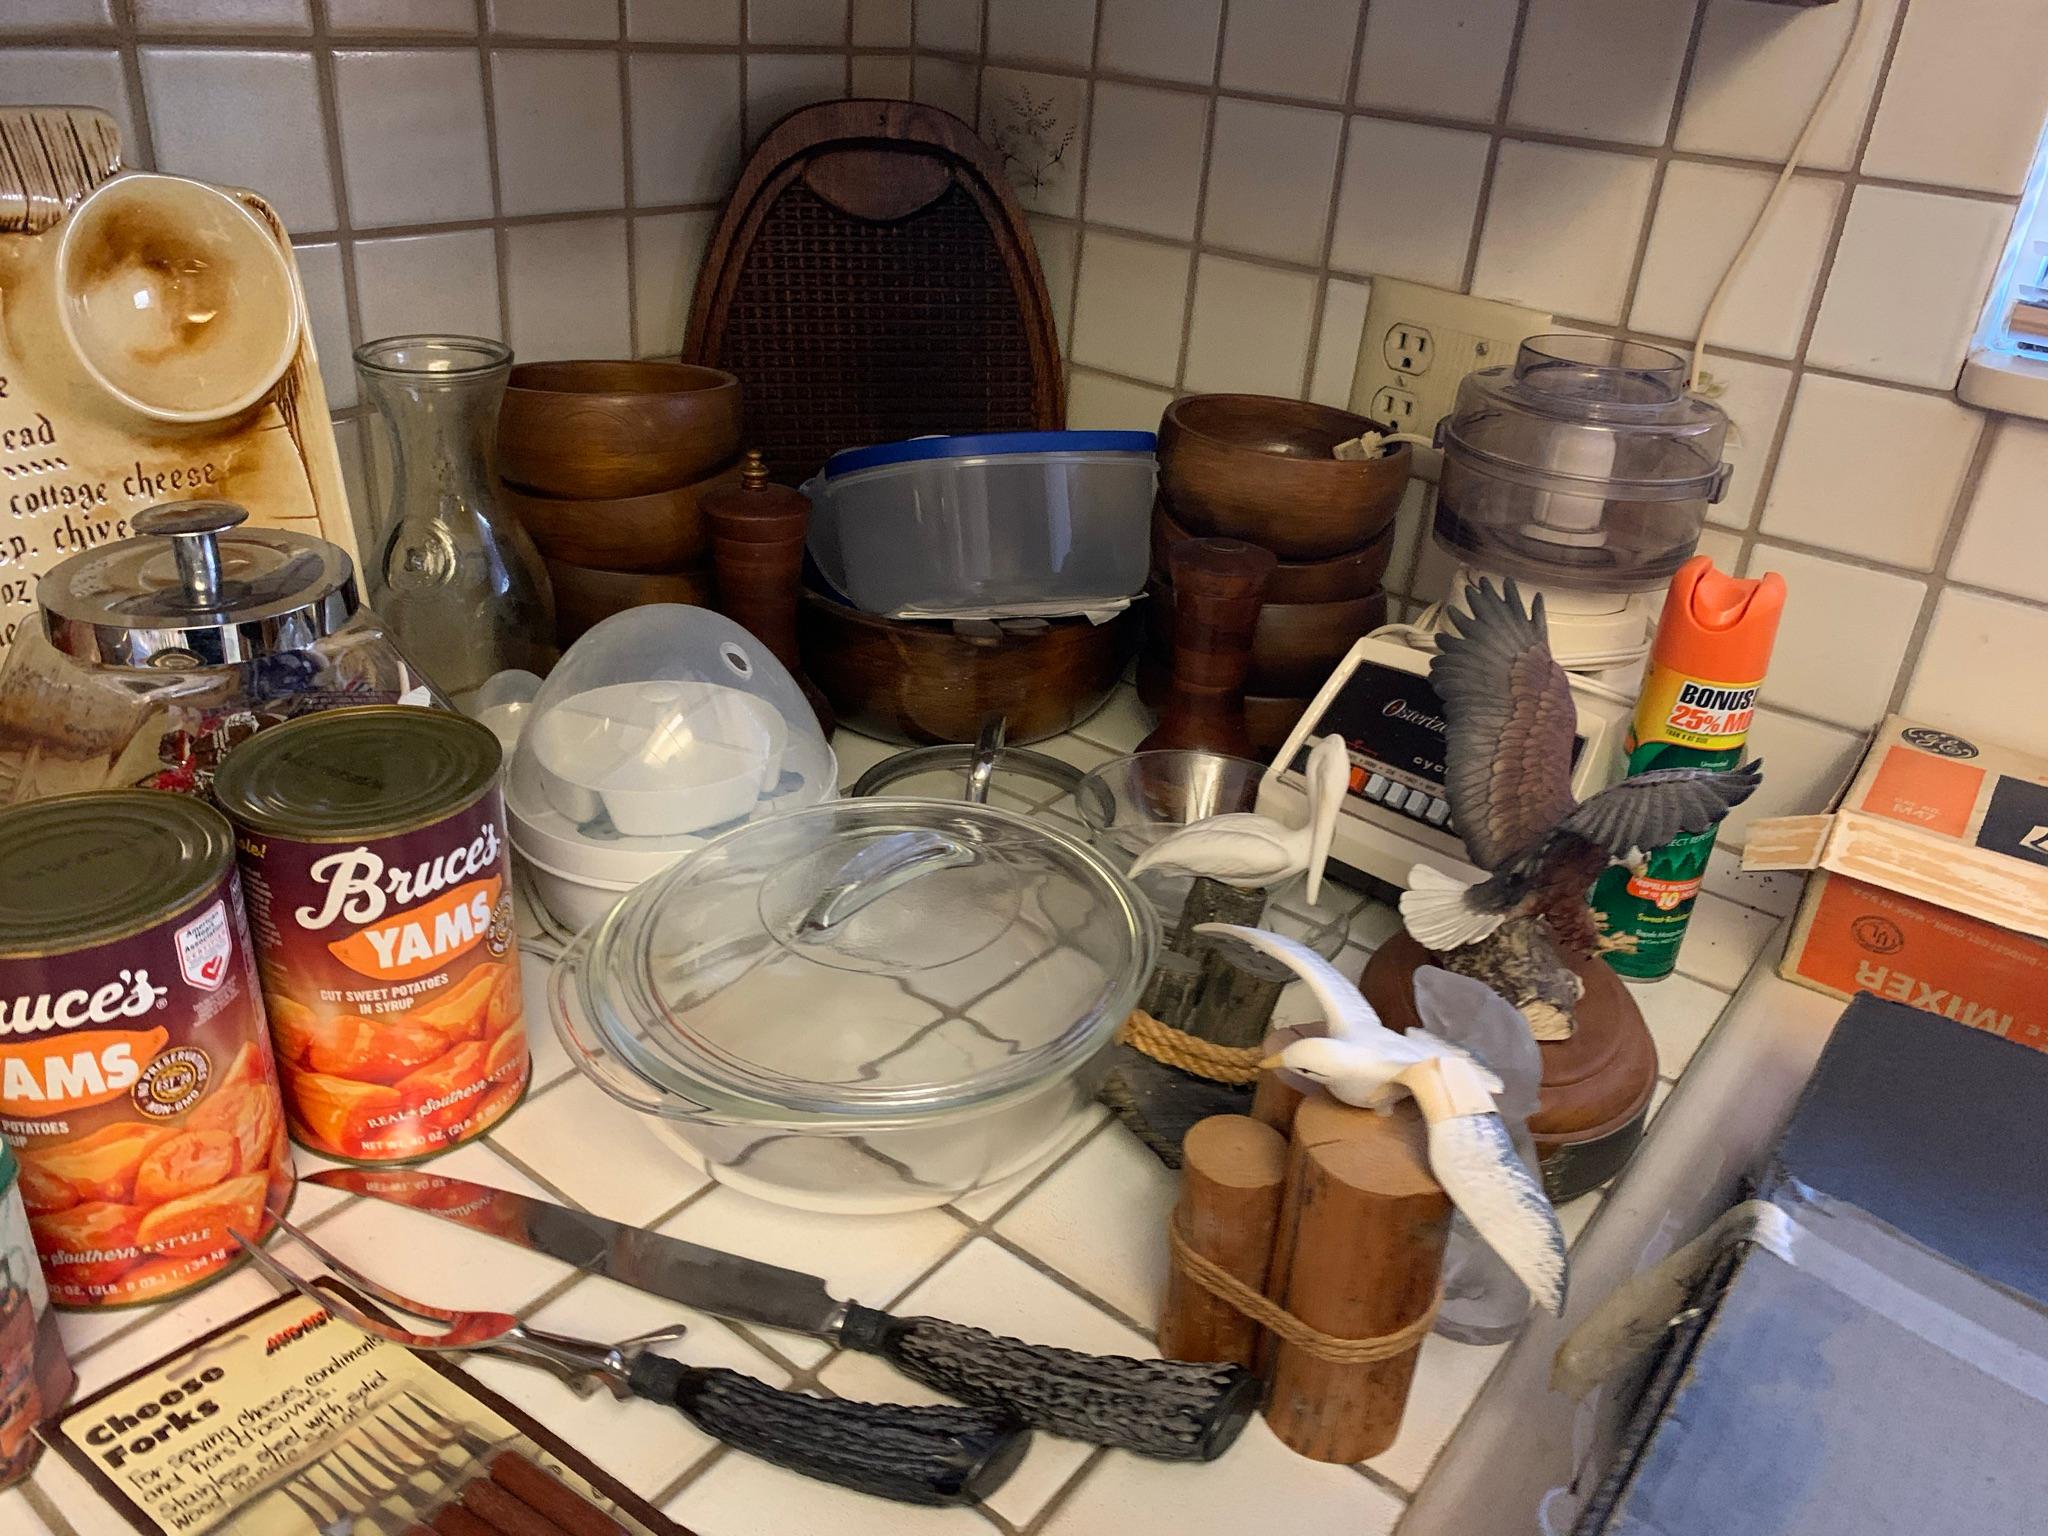 Kitchen Clean Out - Lots of Vintage Kitchen Items, Flatware, Canisters, Small Appliances and More